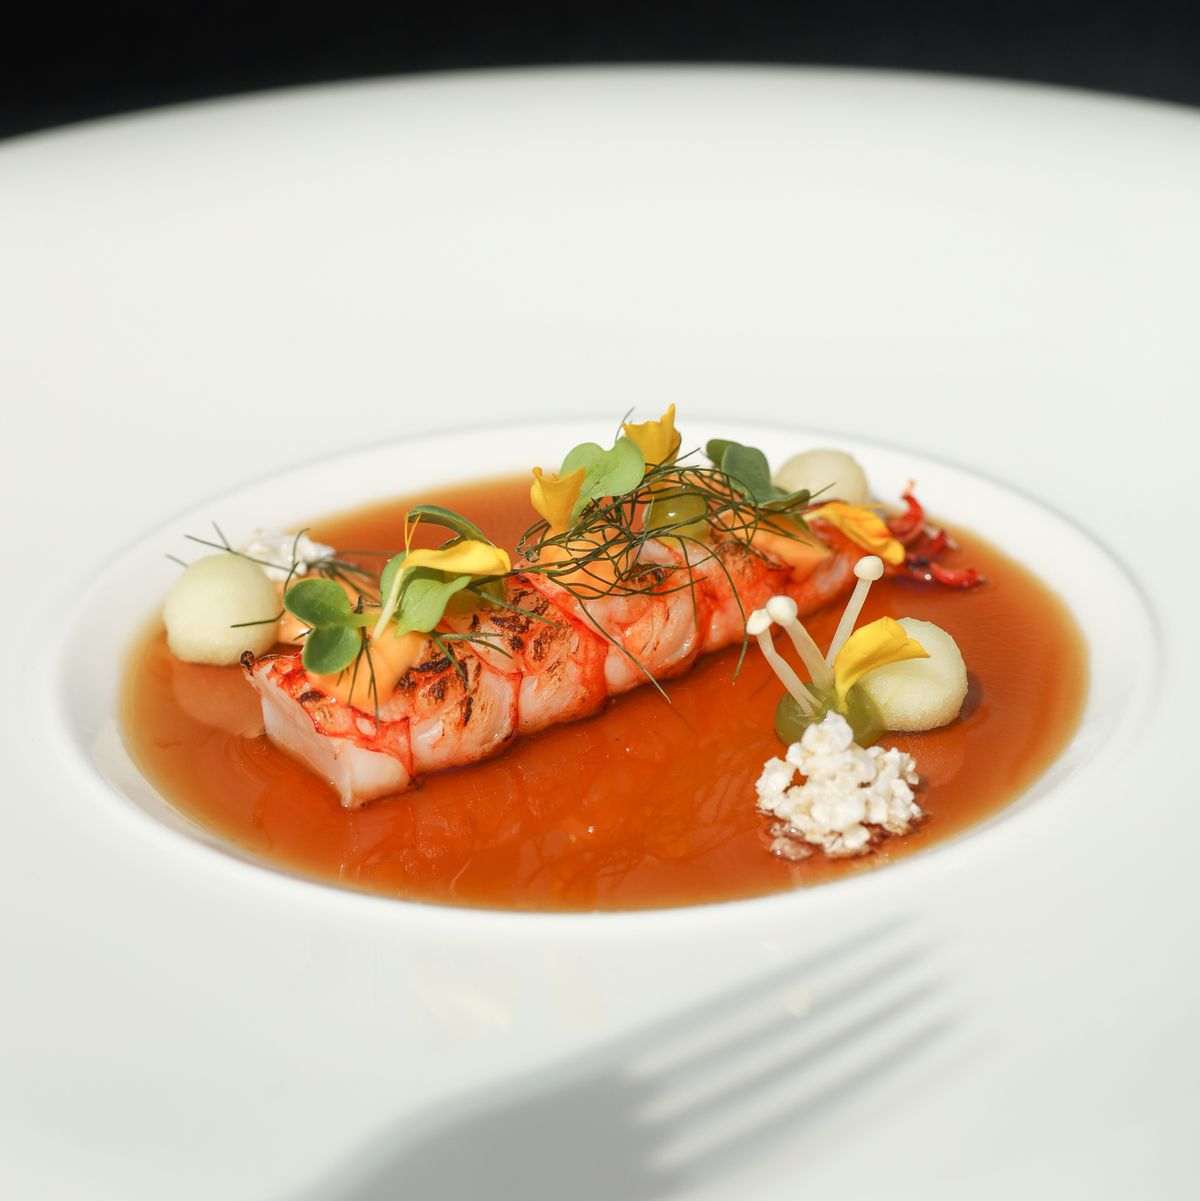 michelin star gourmet dish with prawn in seafood consomme with horseradish